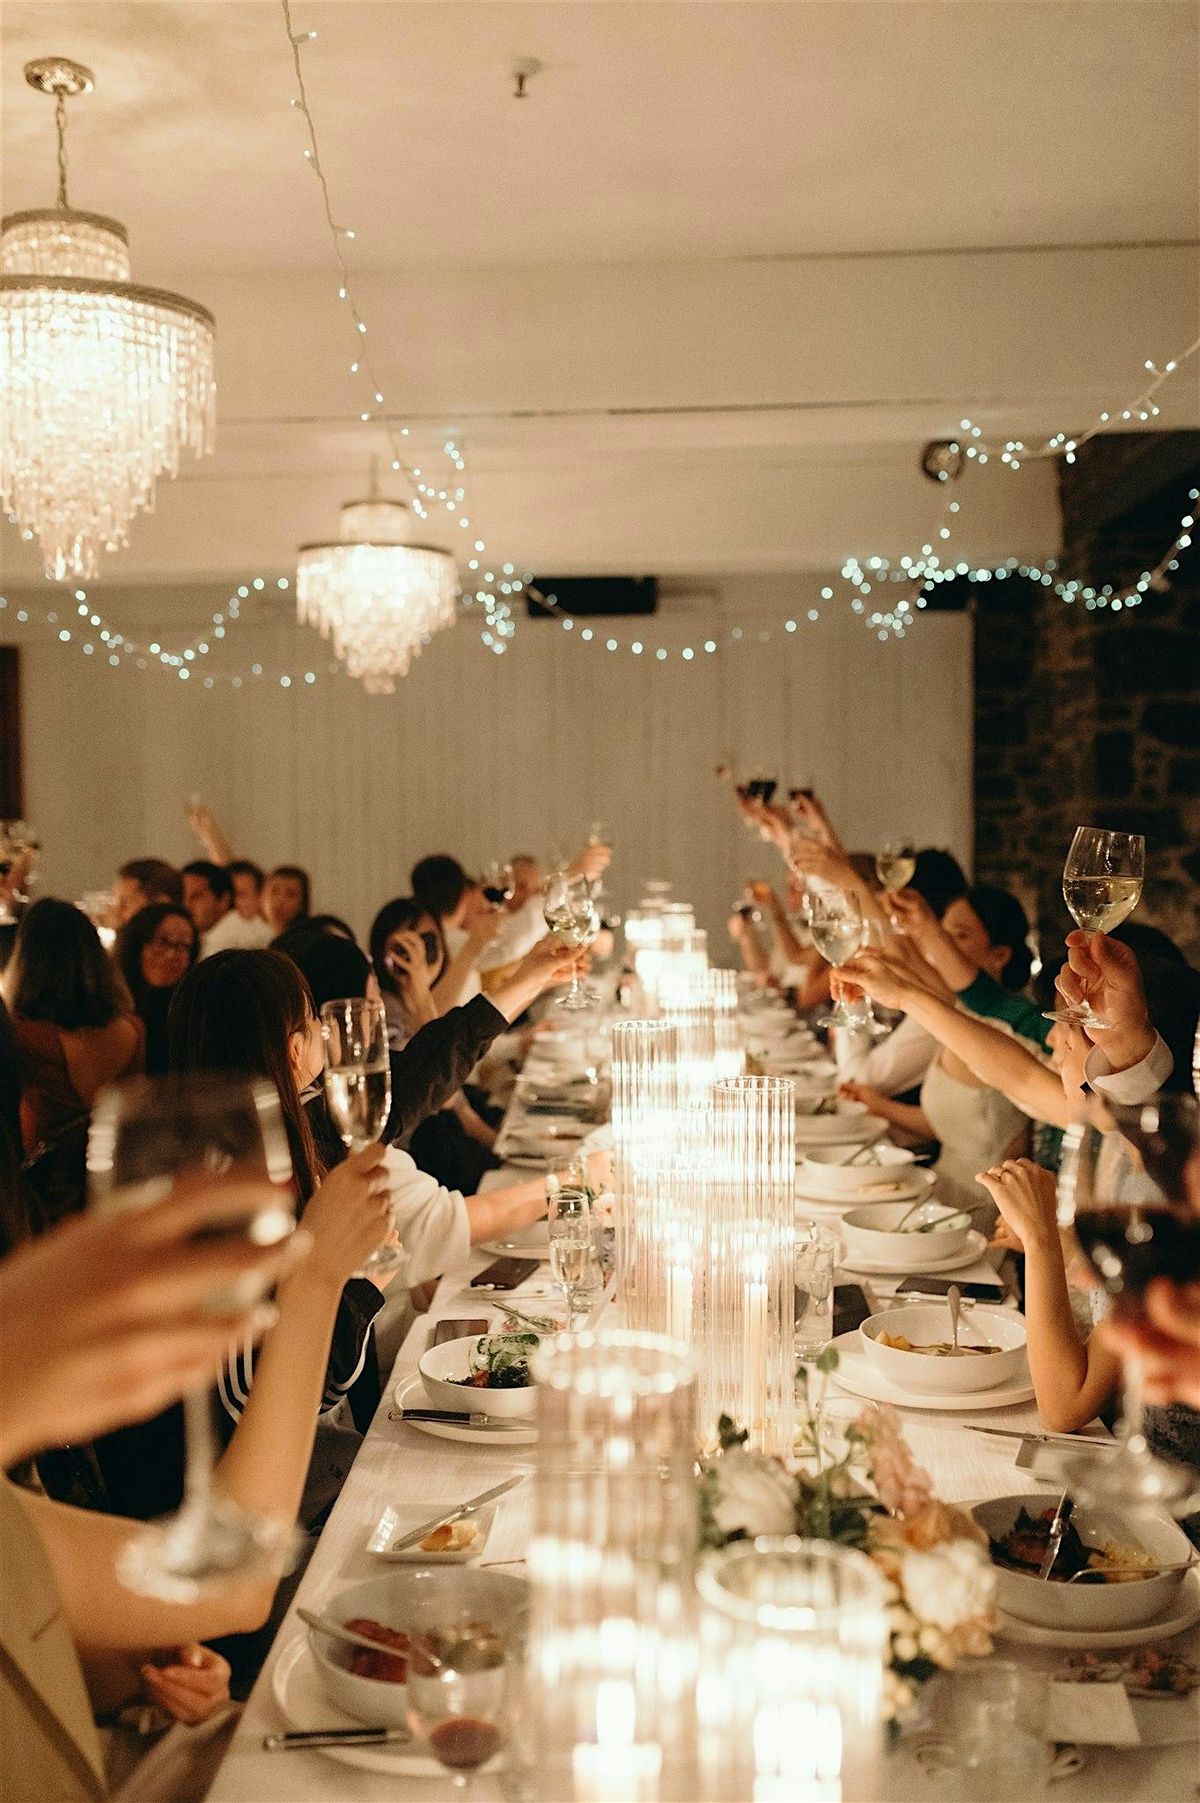 Food Friends Love: Dinner Parties for Singles (Ages 38-55)